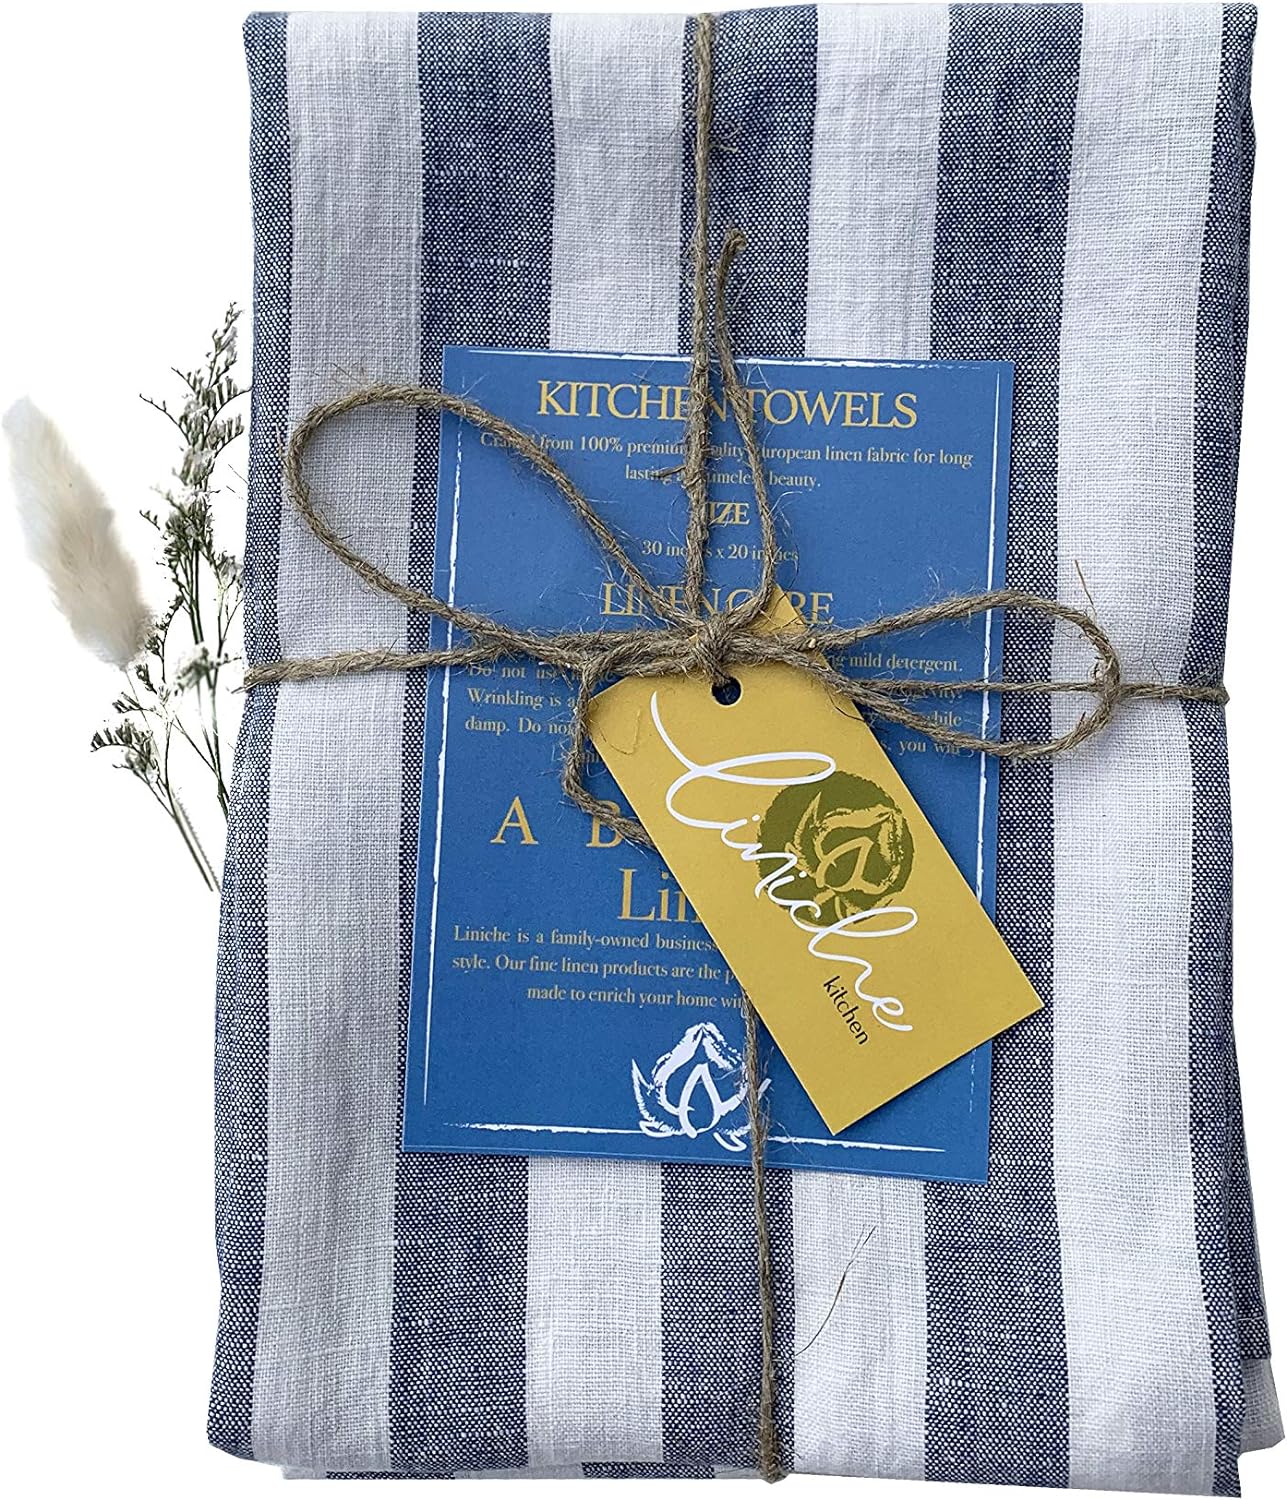 LINICHE Linen Kitchen Towels | 30x20 Inches | Pack of 2 | Lint-Free Dish Cloth | Lightweight Fabric | Flax Tea Towel, Napkin | Table Setting Accessories | Wedding Gift